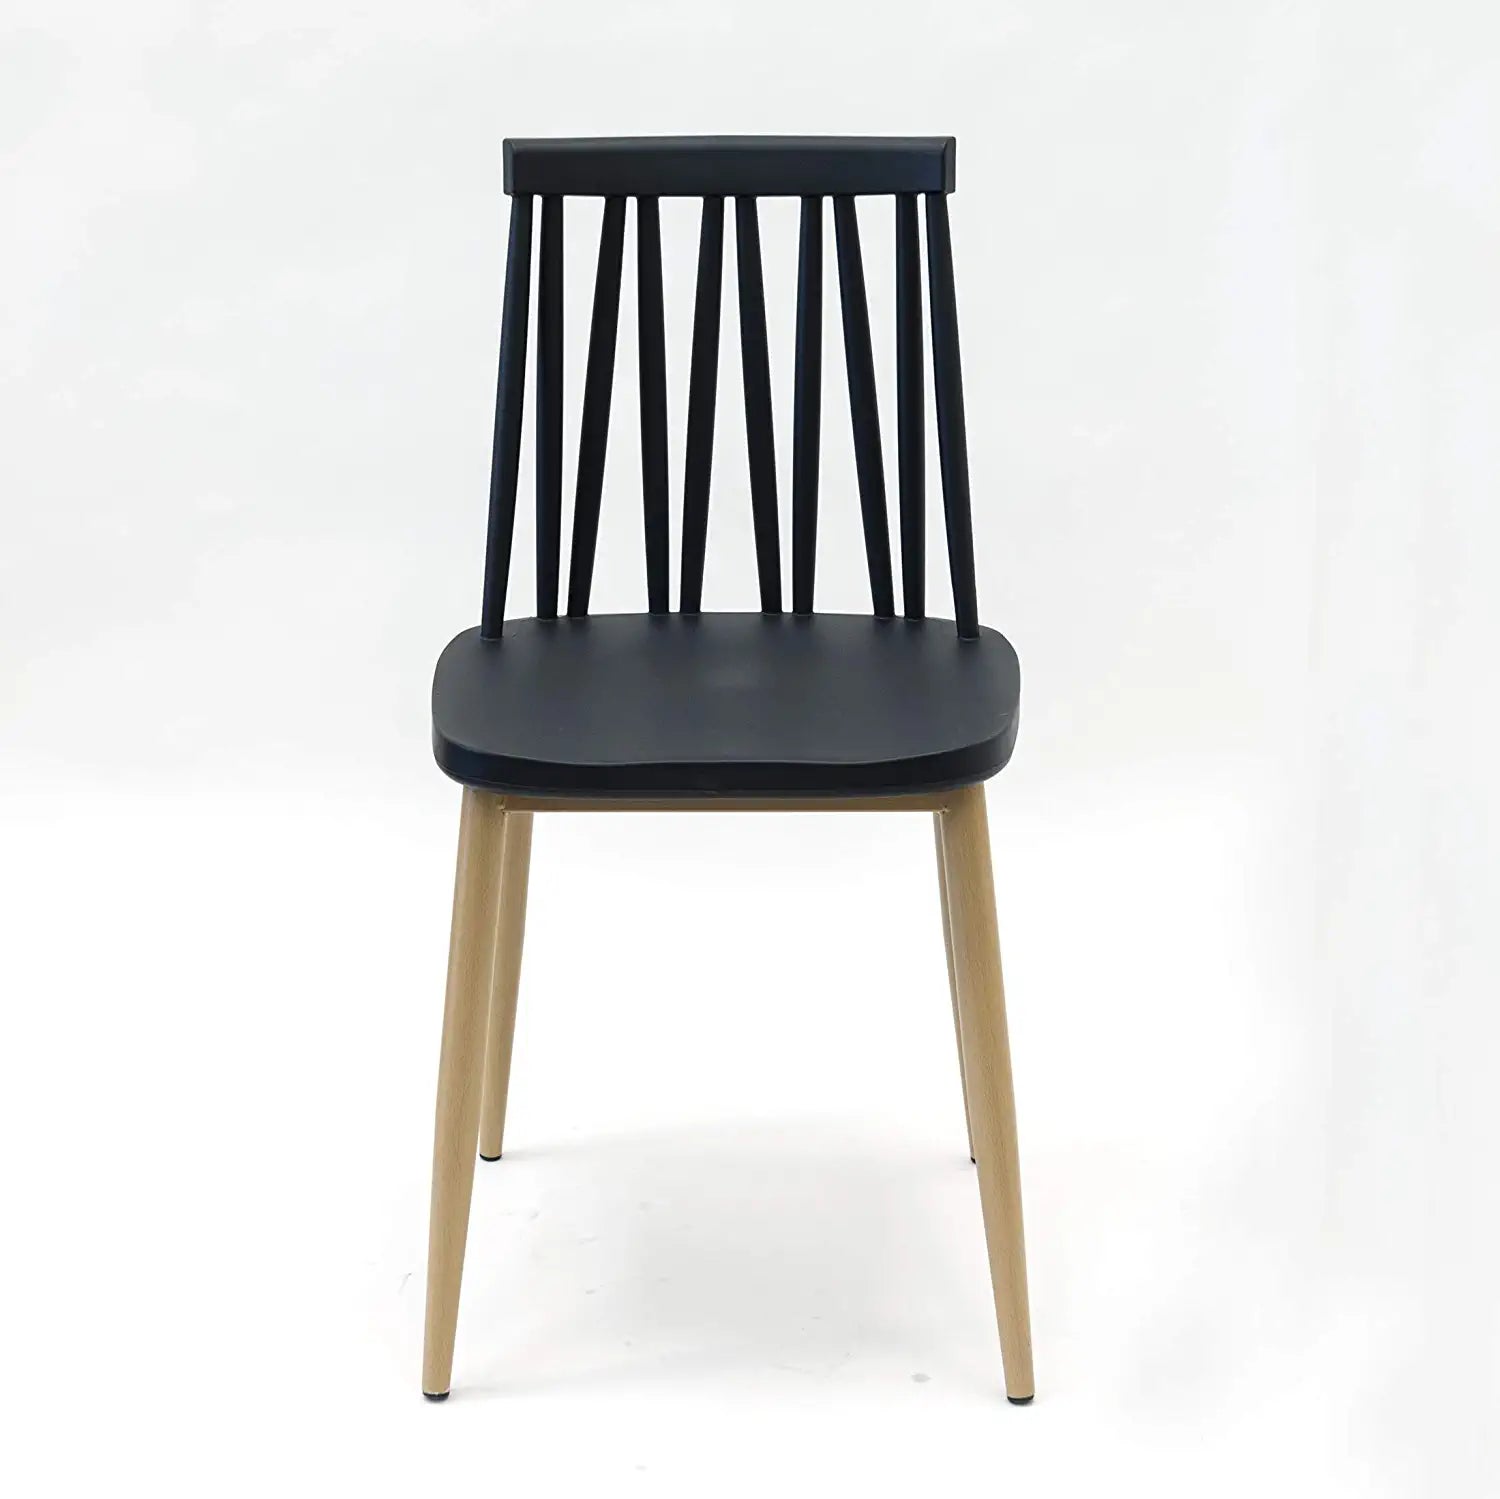 Commercial Seating Products Black Windsor Barstool Chairs